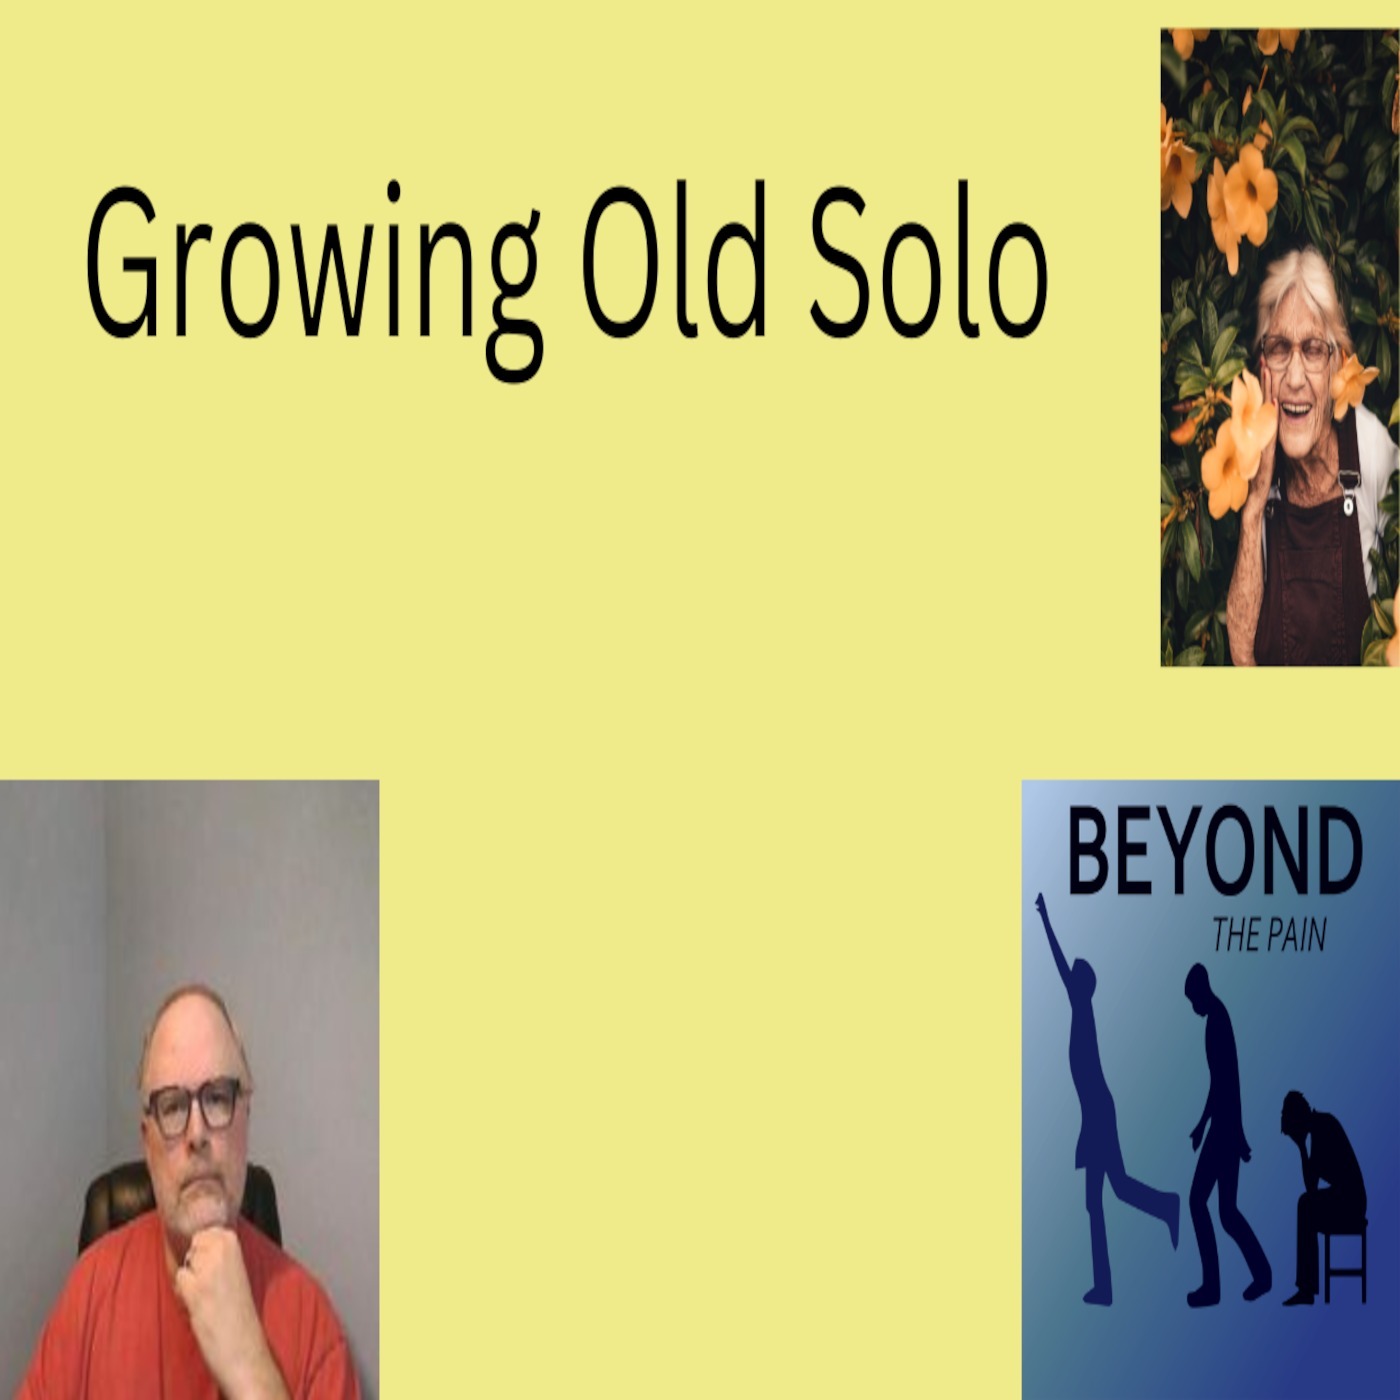 Growing old alone. What happens when you no longer have a support system?